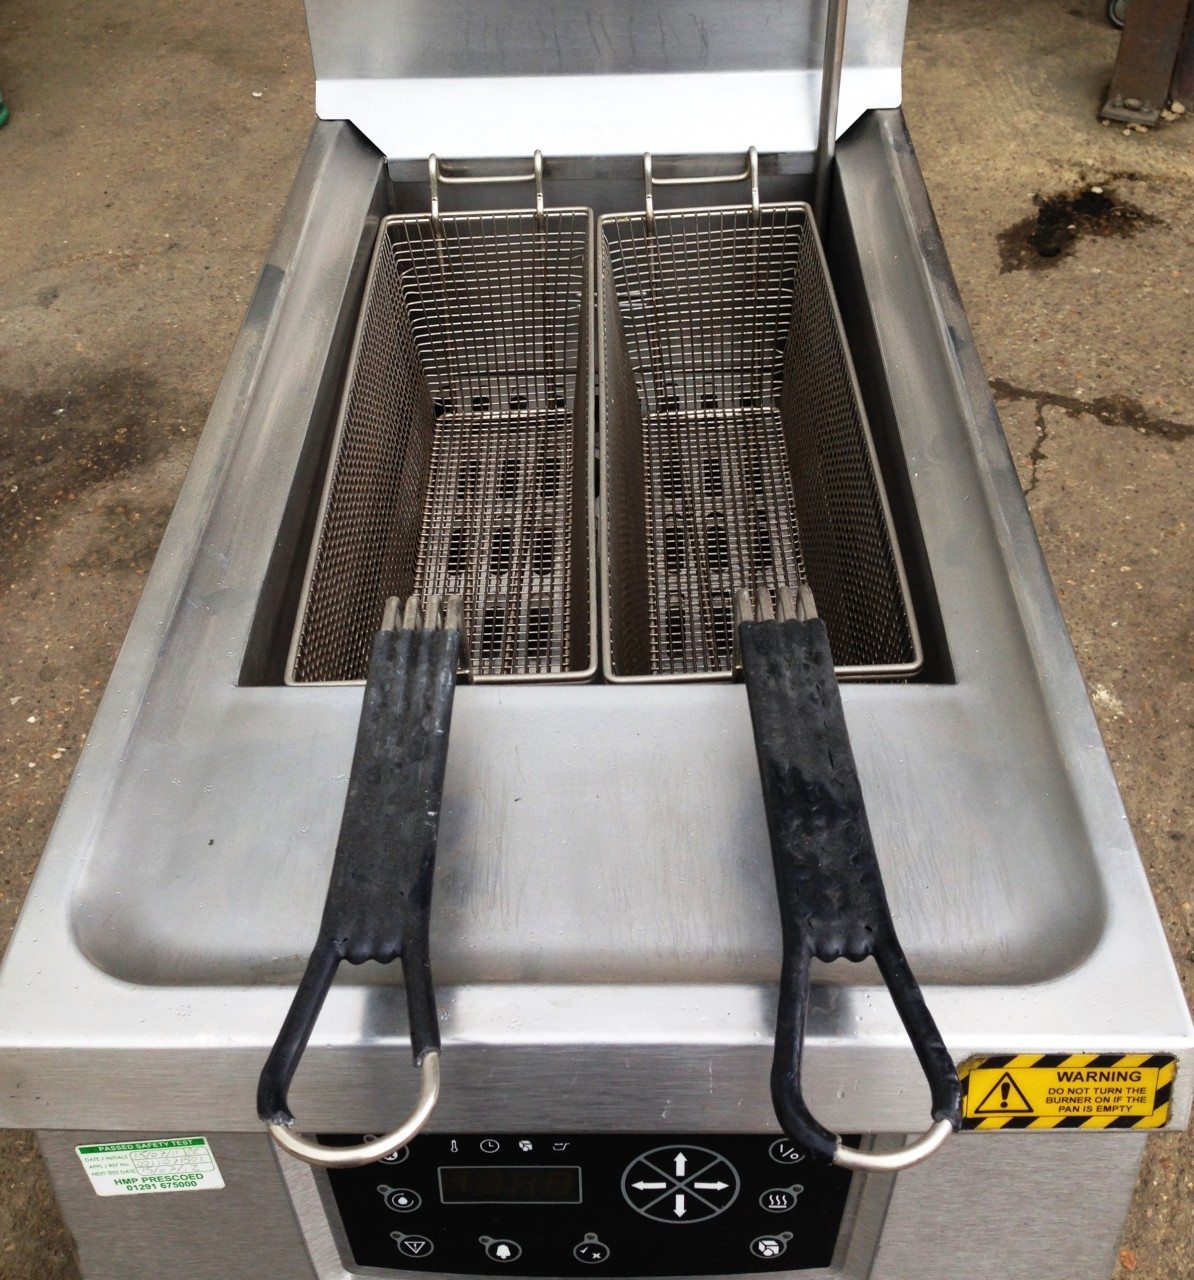 FALCON Infinity Gas Single Well Twin Basket Fryer with Filtration